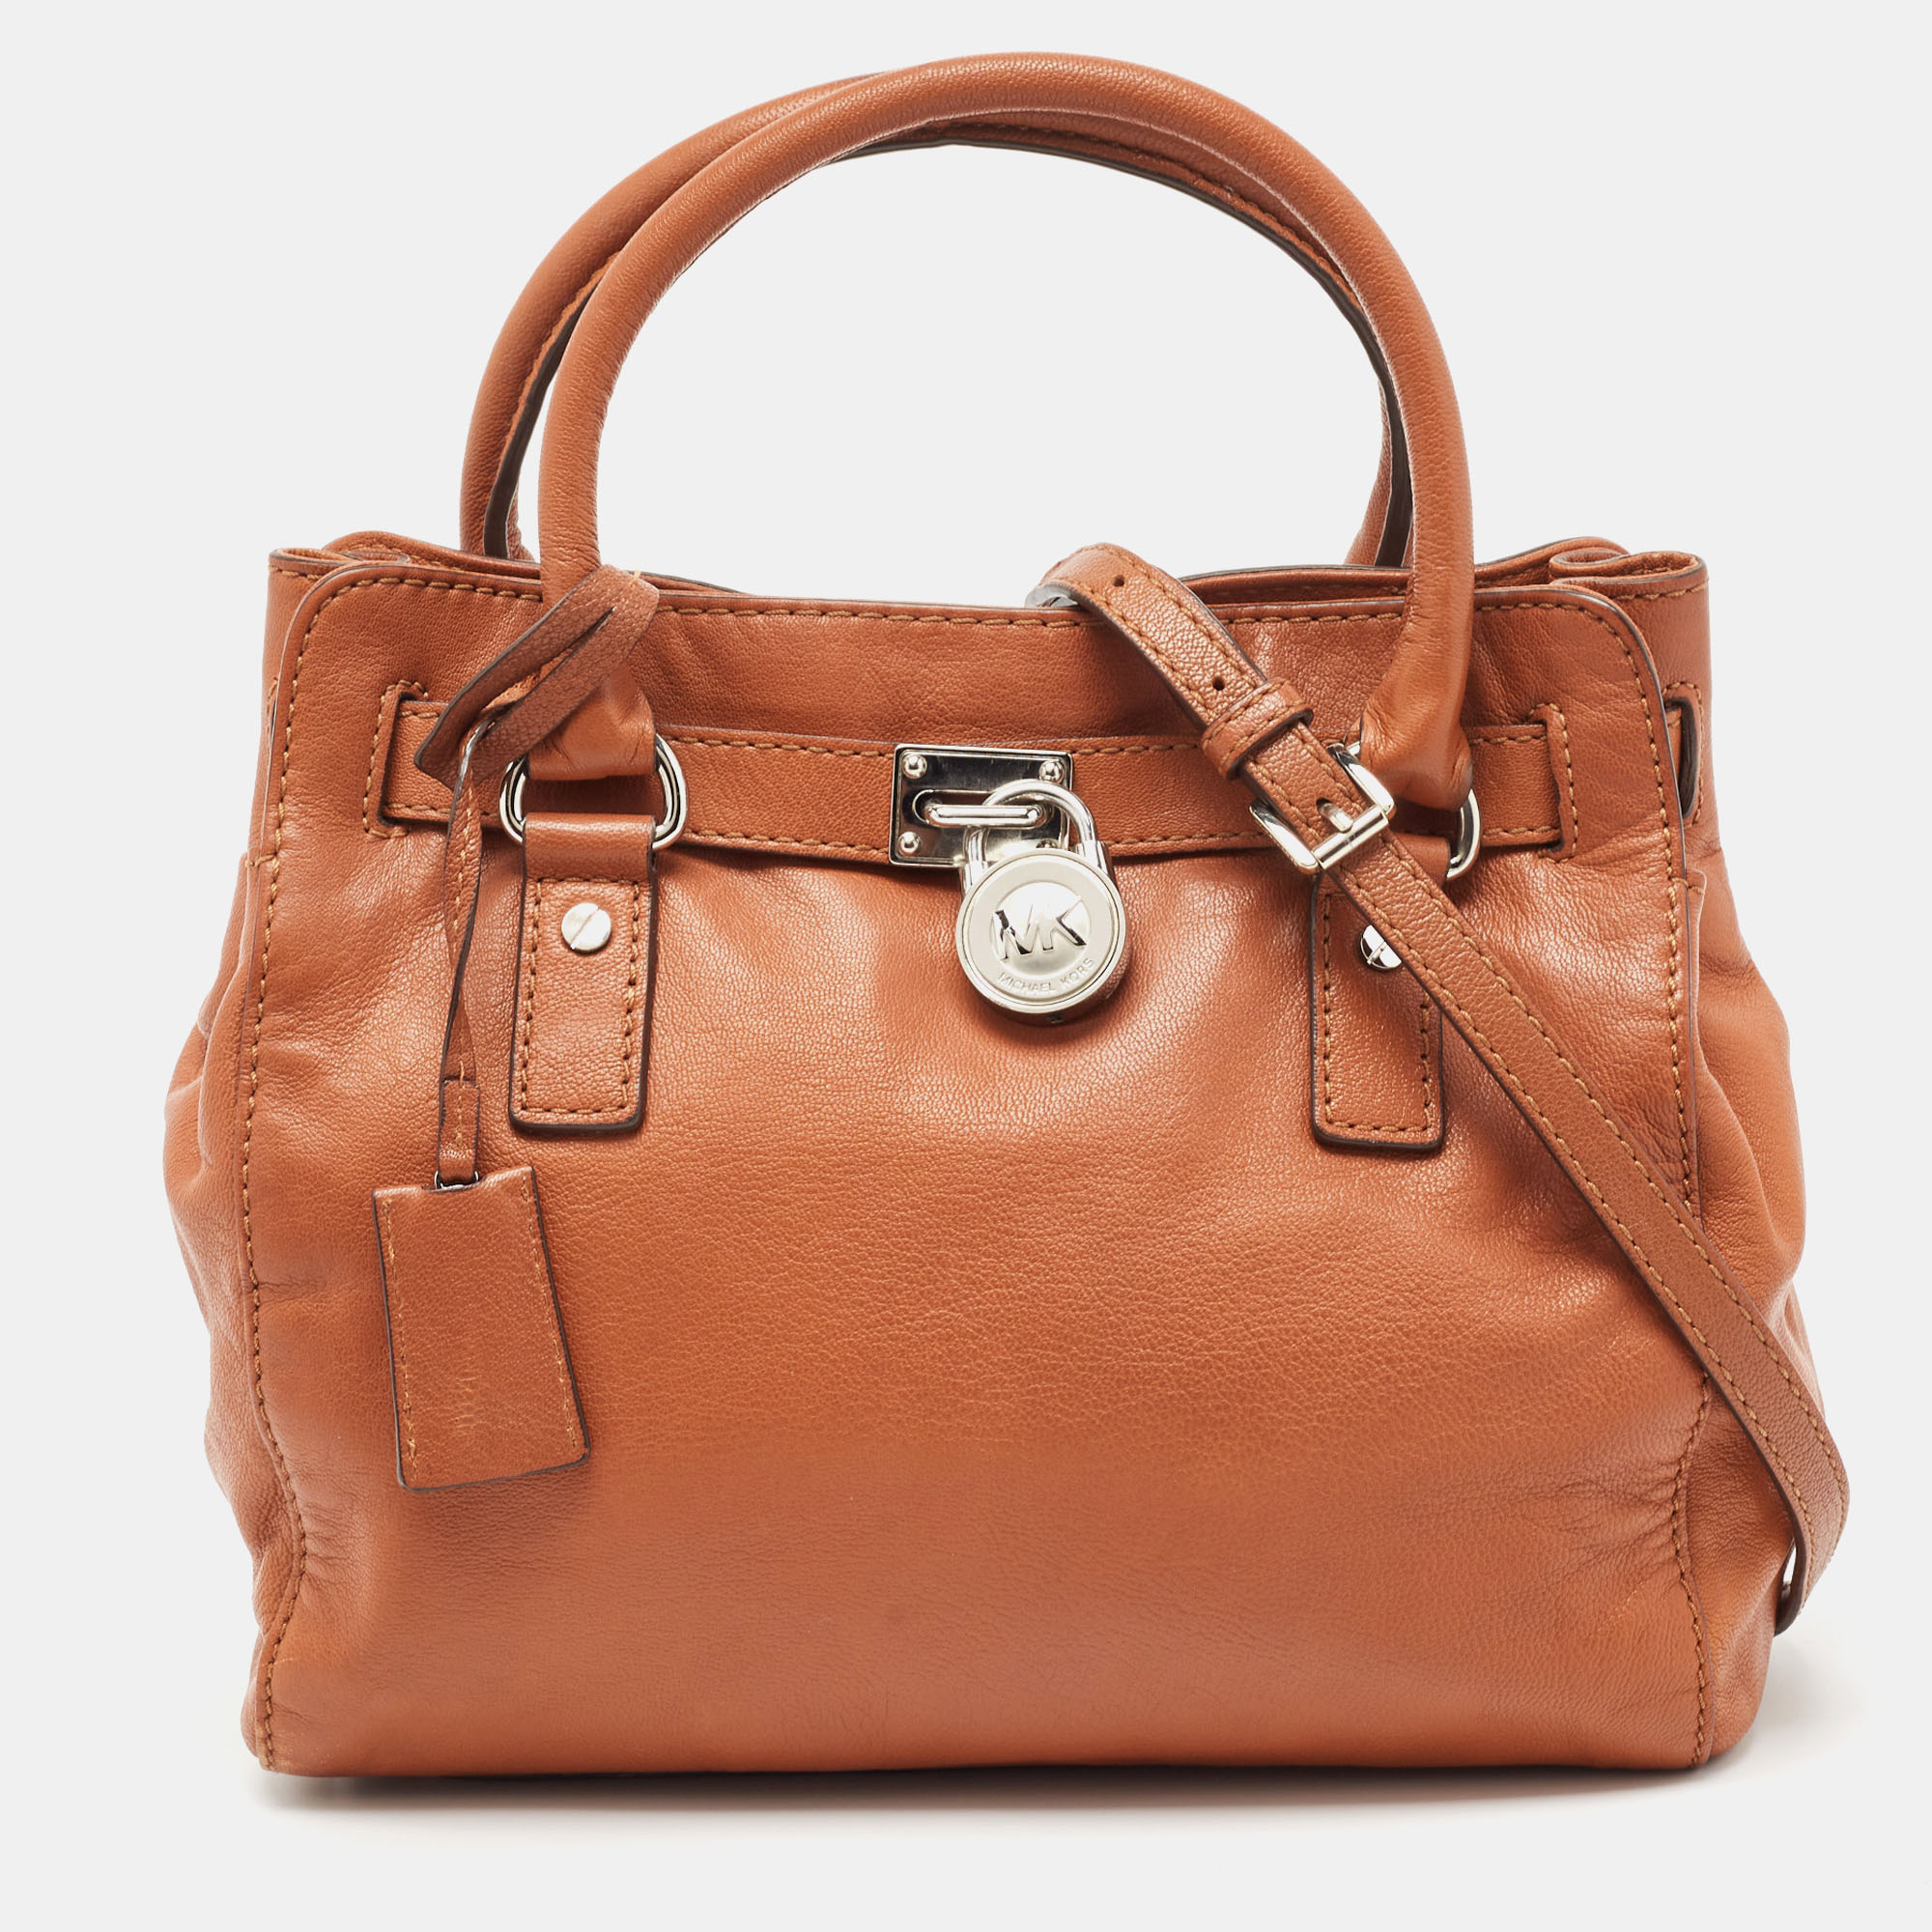 MICHAEL Michael Kors Brown Leather Hamilton North South Tote